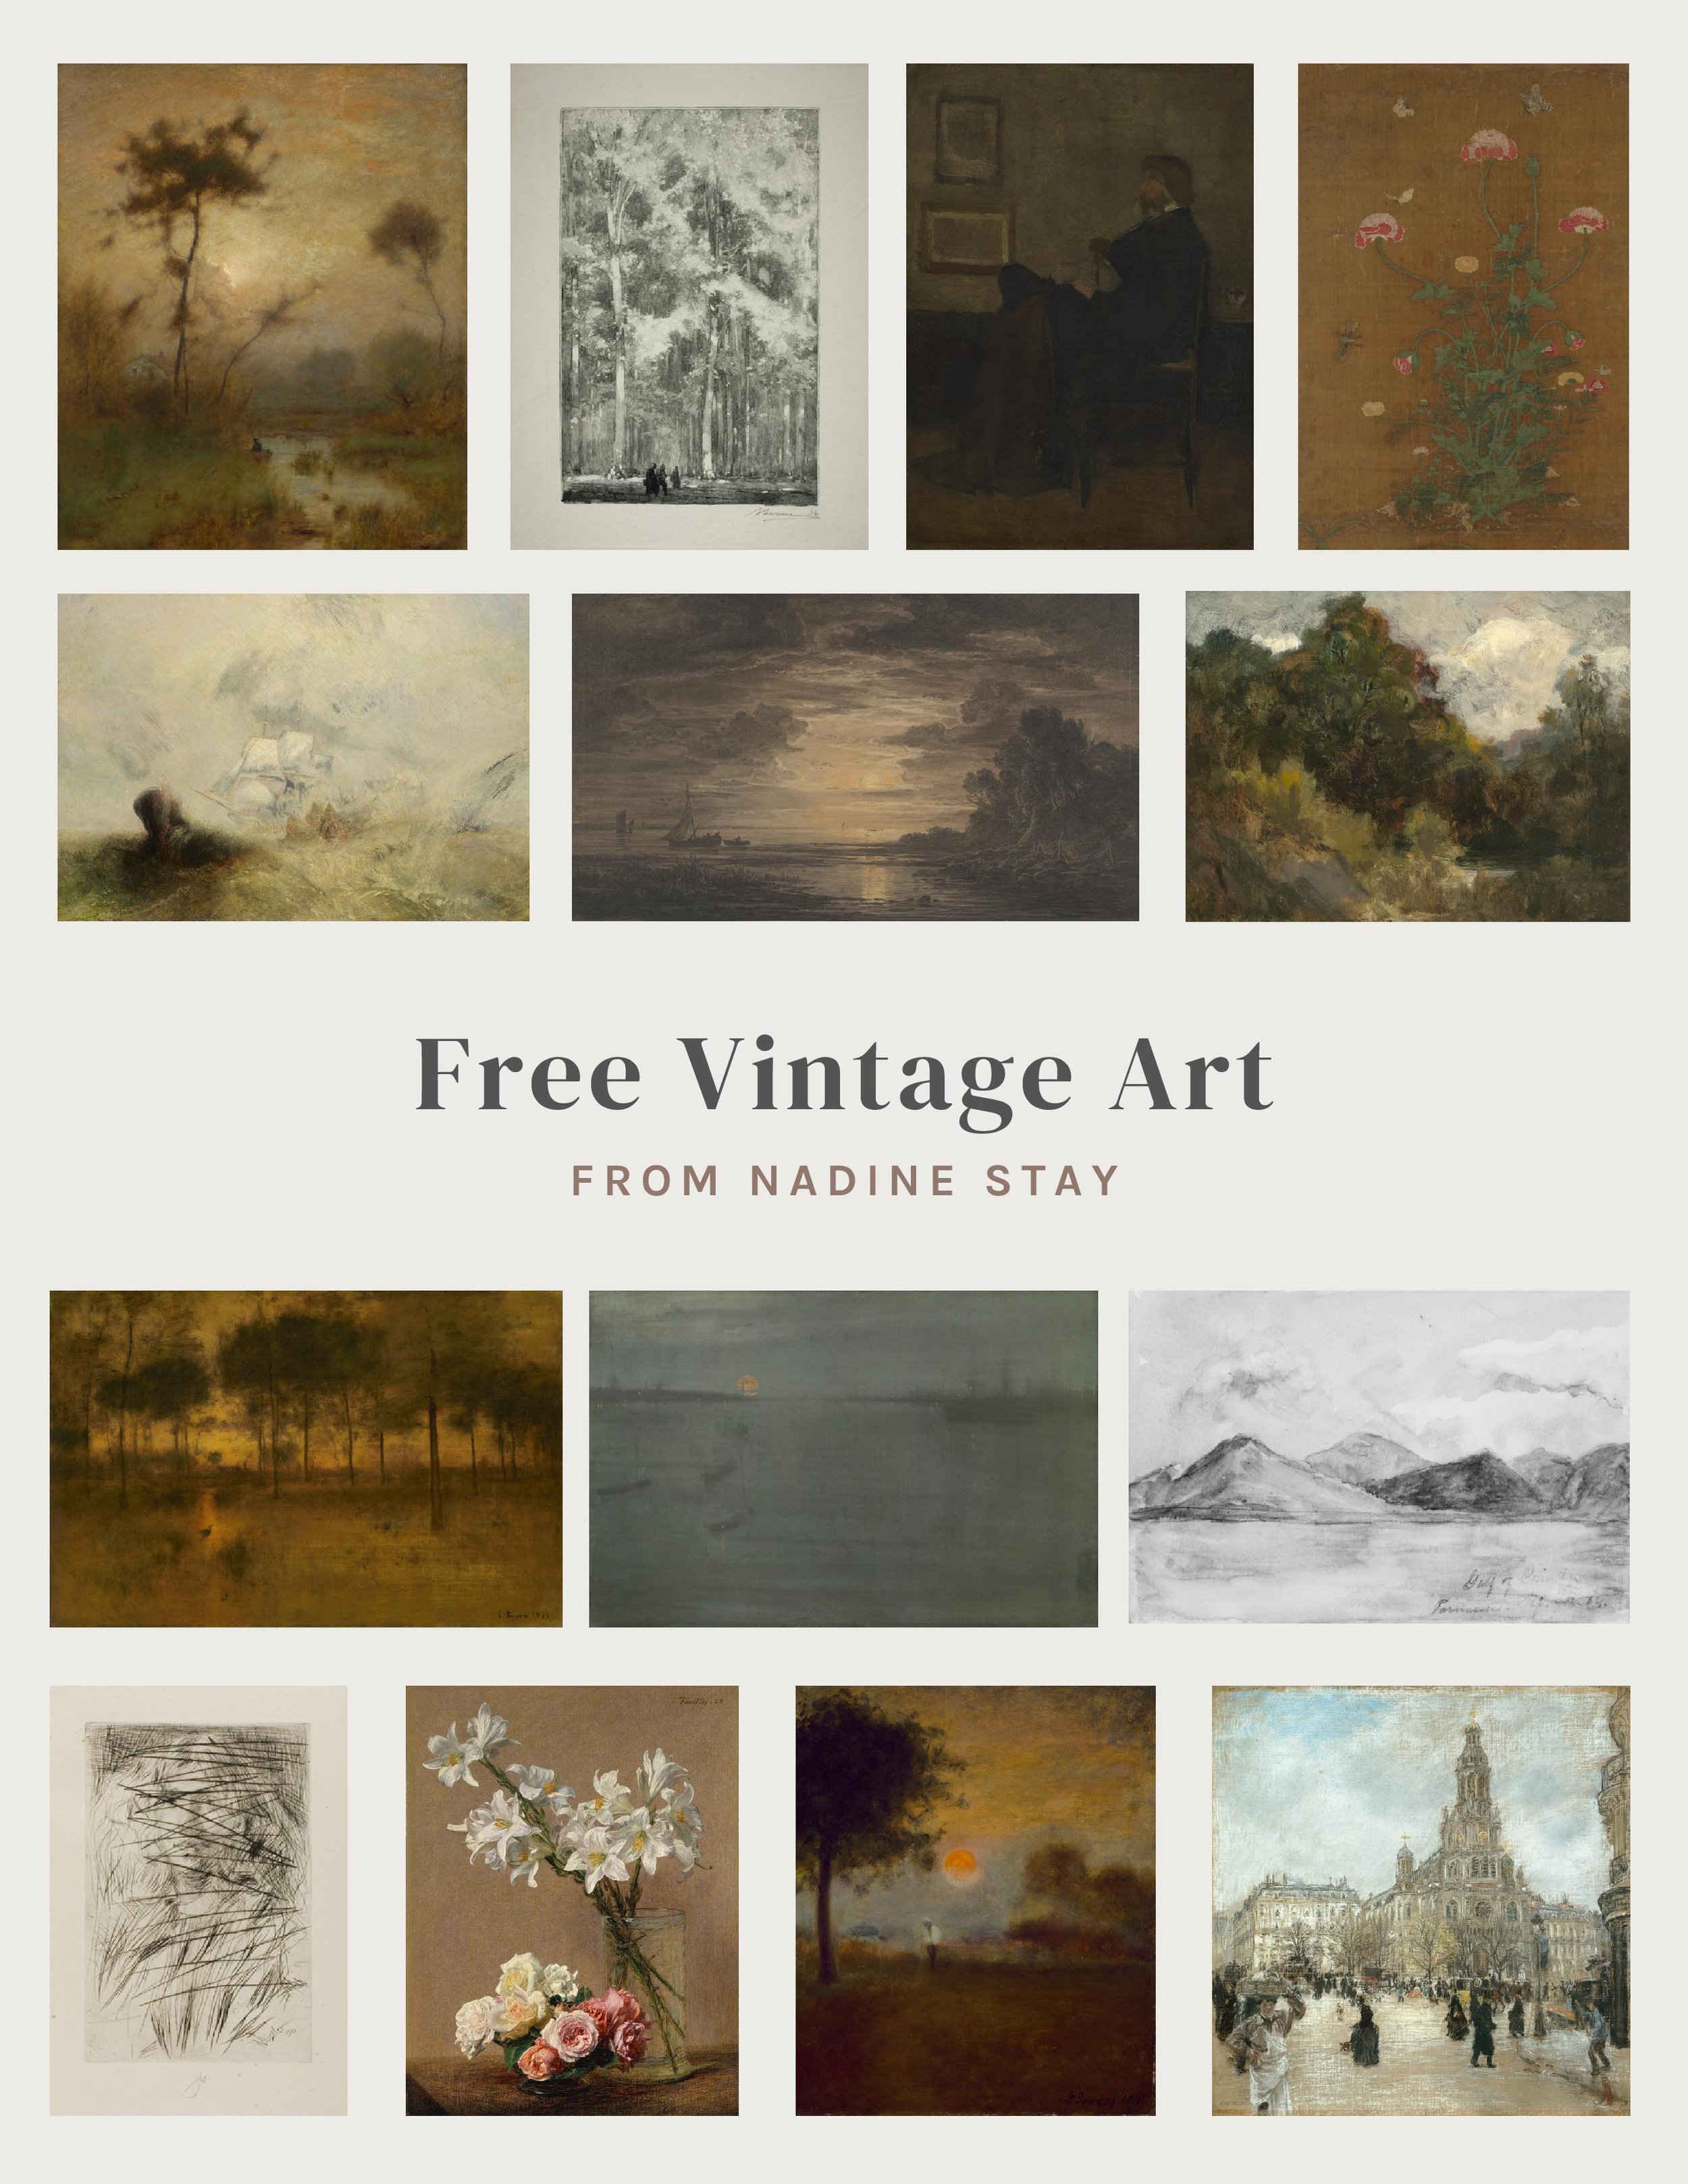 14 free vintage art digital downloads from Nadine Stay | Vintage prints you can download for free. Free moody art and sketches. Free landscapes, portraits, still life, graphite drawings, and paintings at nadinestay.com. Free art! | Nadine Stay